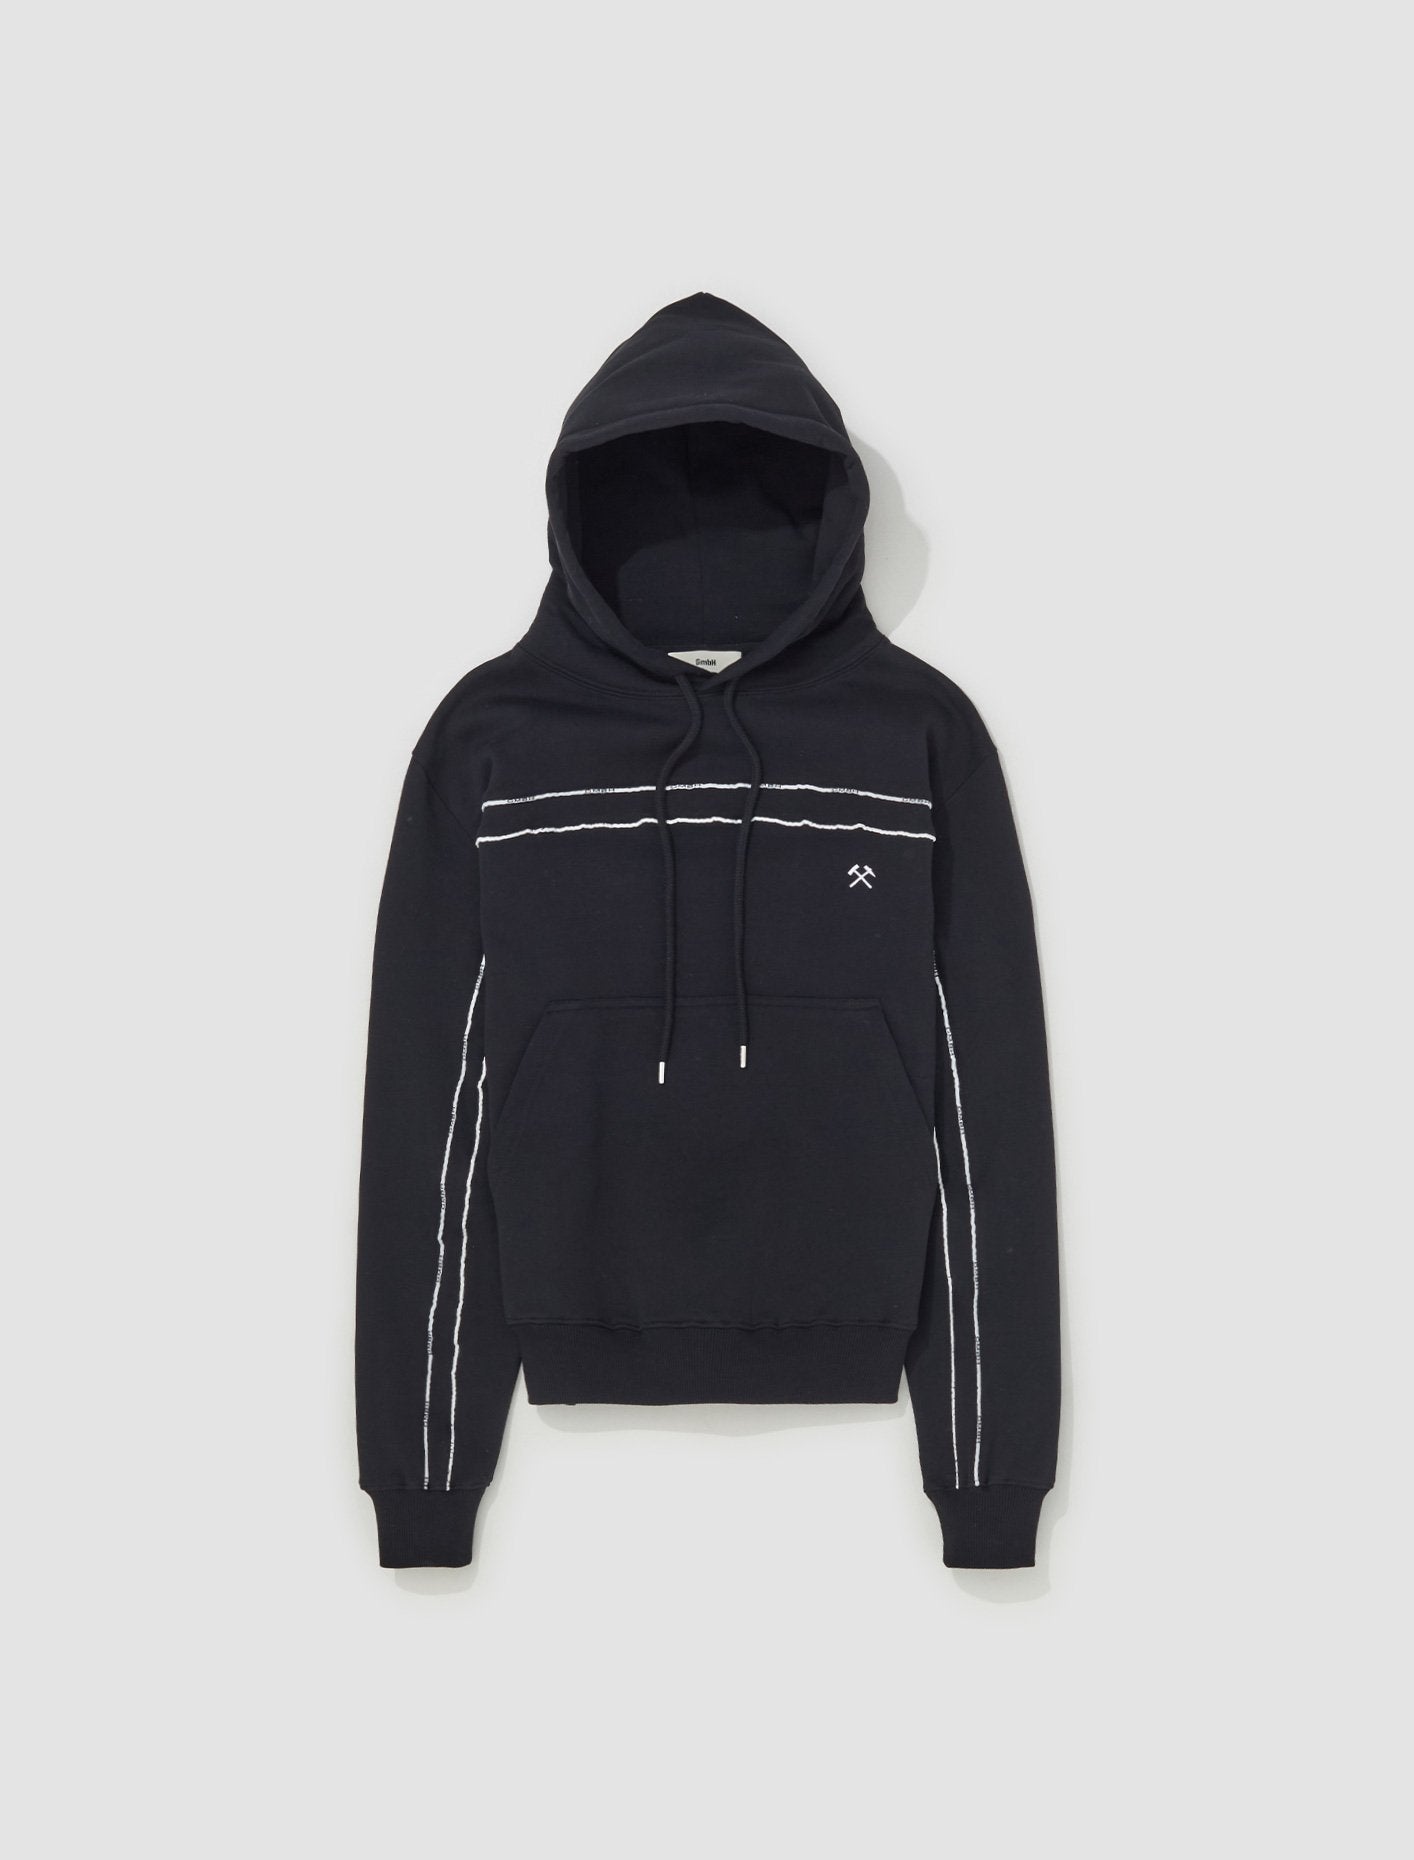 Hoodie with Piping in Black